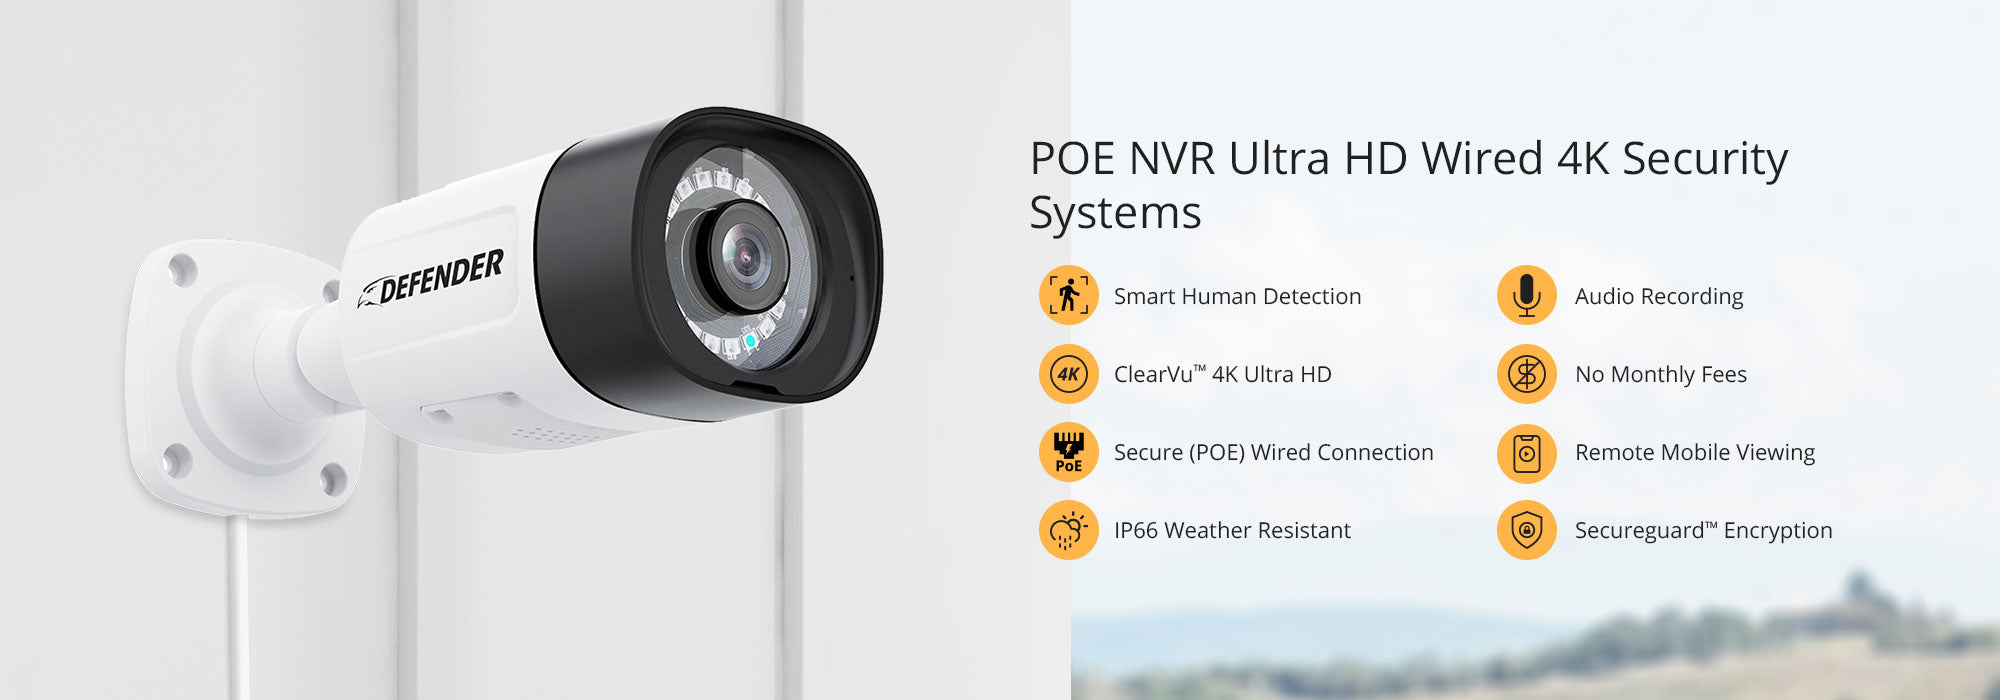 POE NVR Ultra HD Wired 4K Security Systems